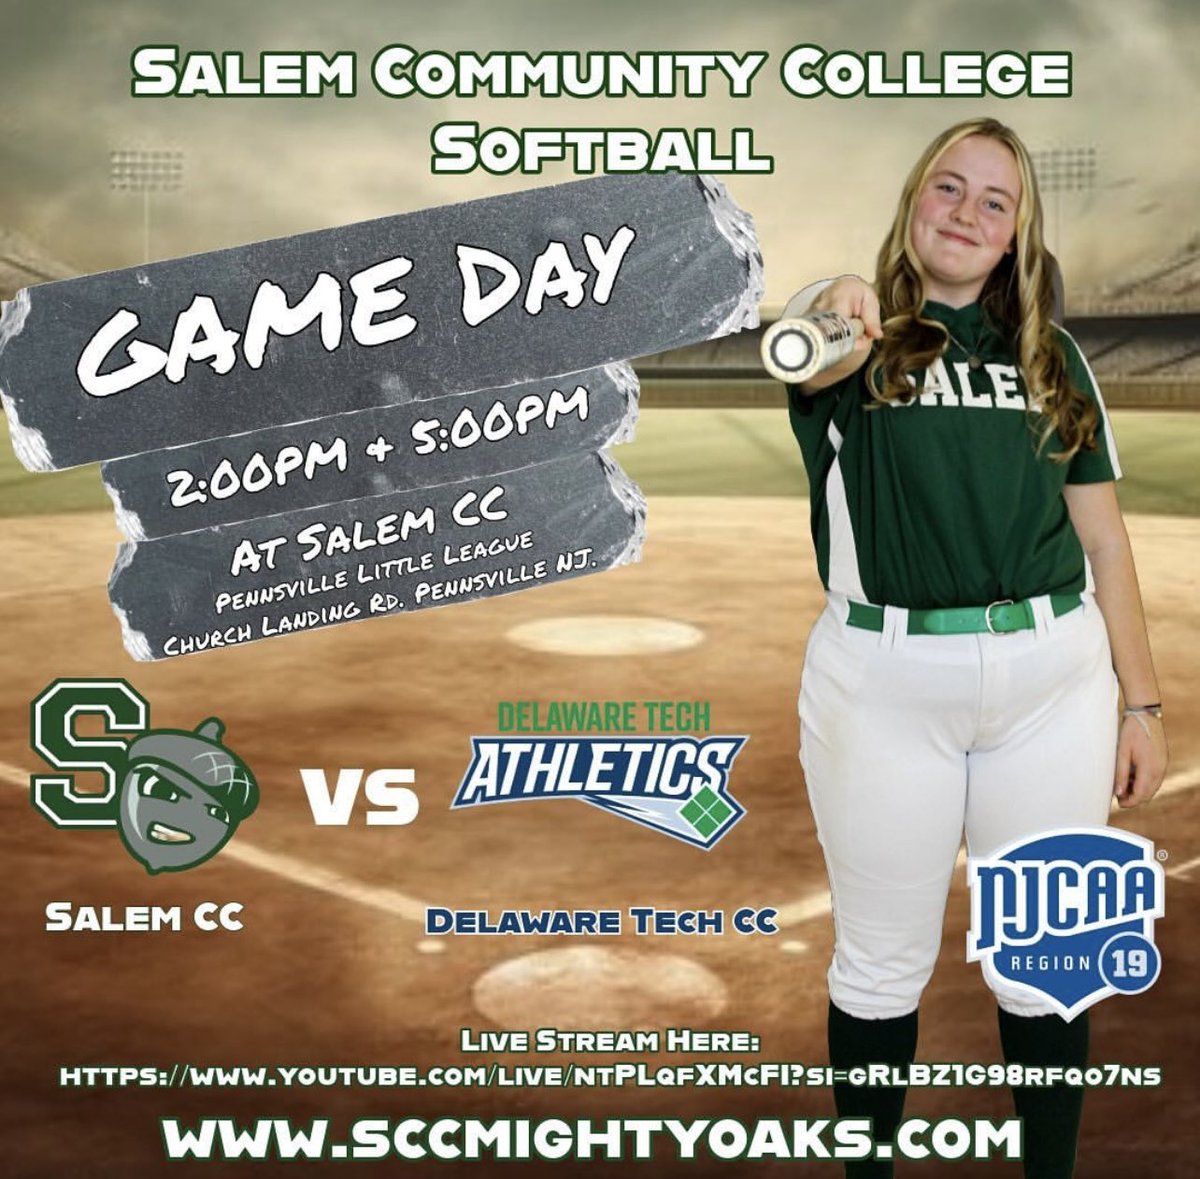 Start of a busy weekend for the Mighty Oaks, let’s play 2! 💪🥎 🆚: Del Tech ⏰: 2:00 & 4:00 📍: Church Landing Rd, Pennsville, NJ 08070 💻: Stream Link: youtube.com/@sccmightyoaks… *This is the ONLY live stream link available, please do not click on any links posted*